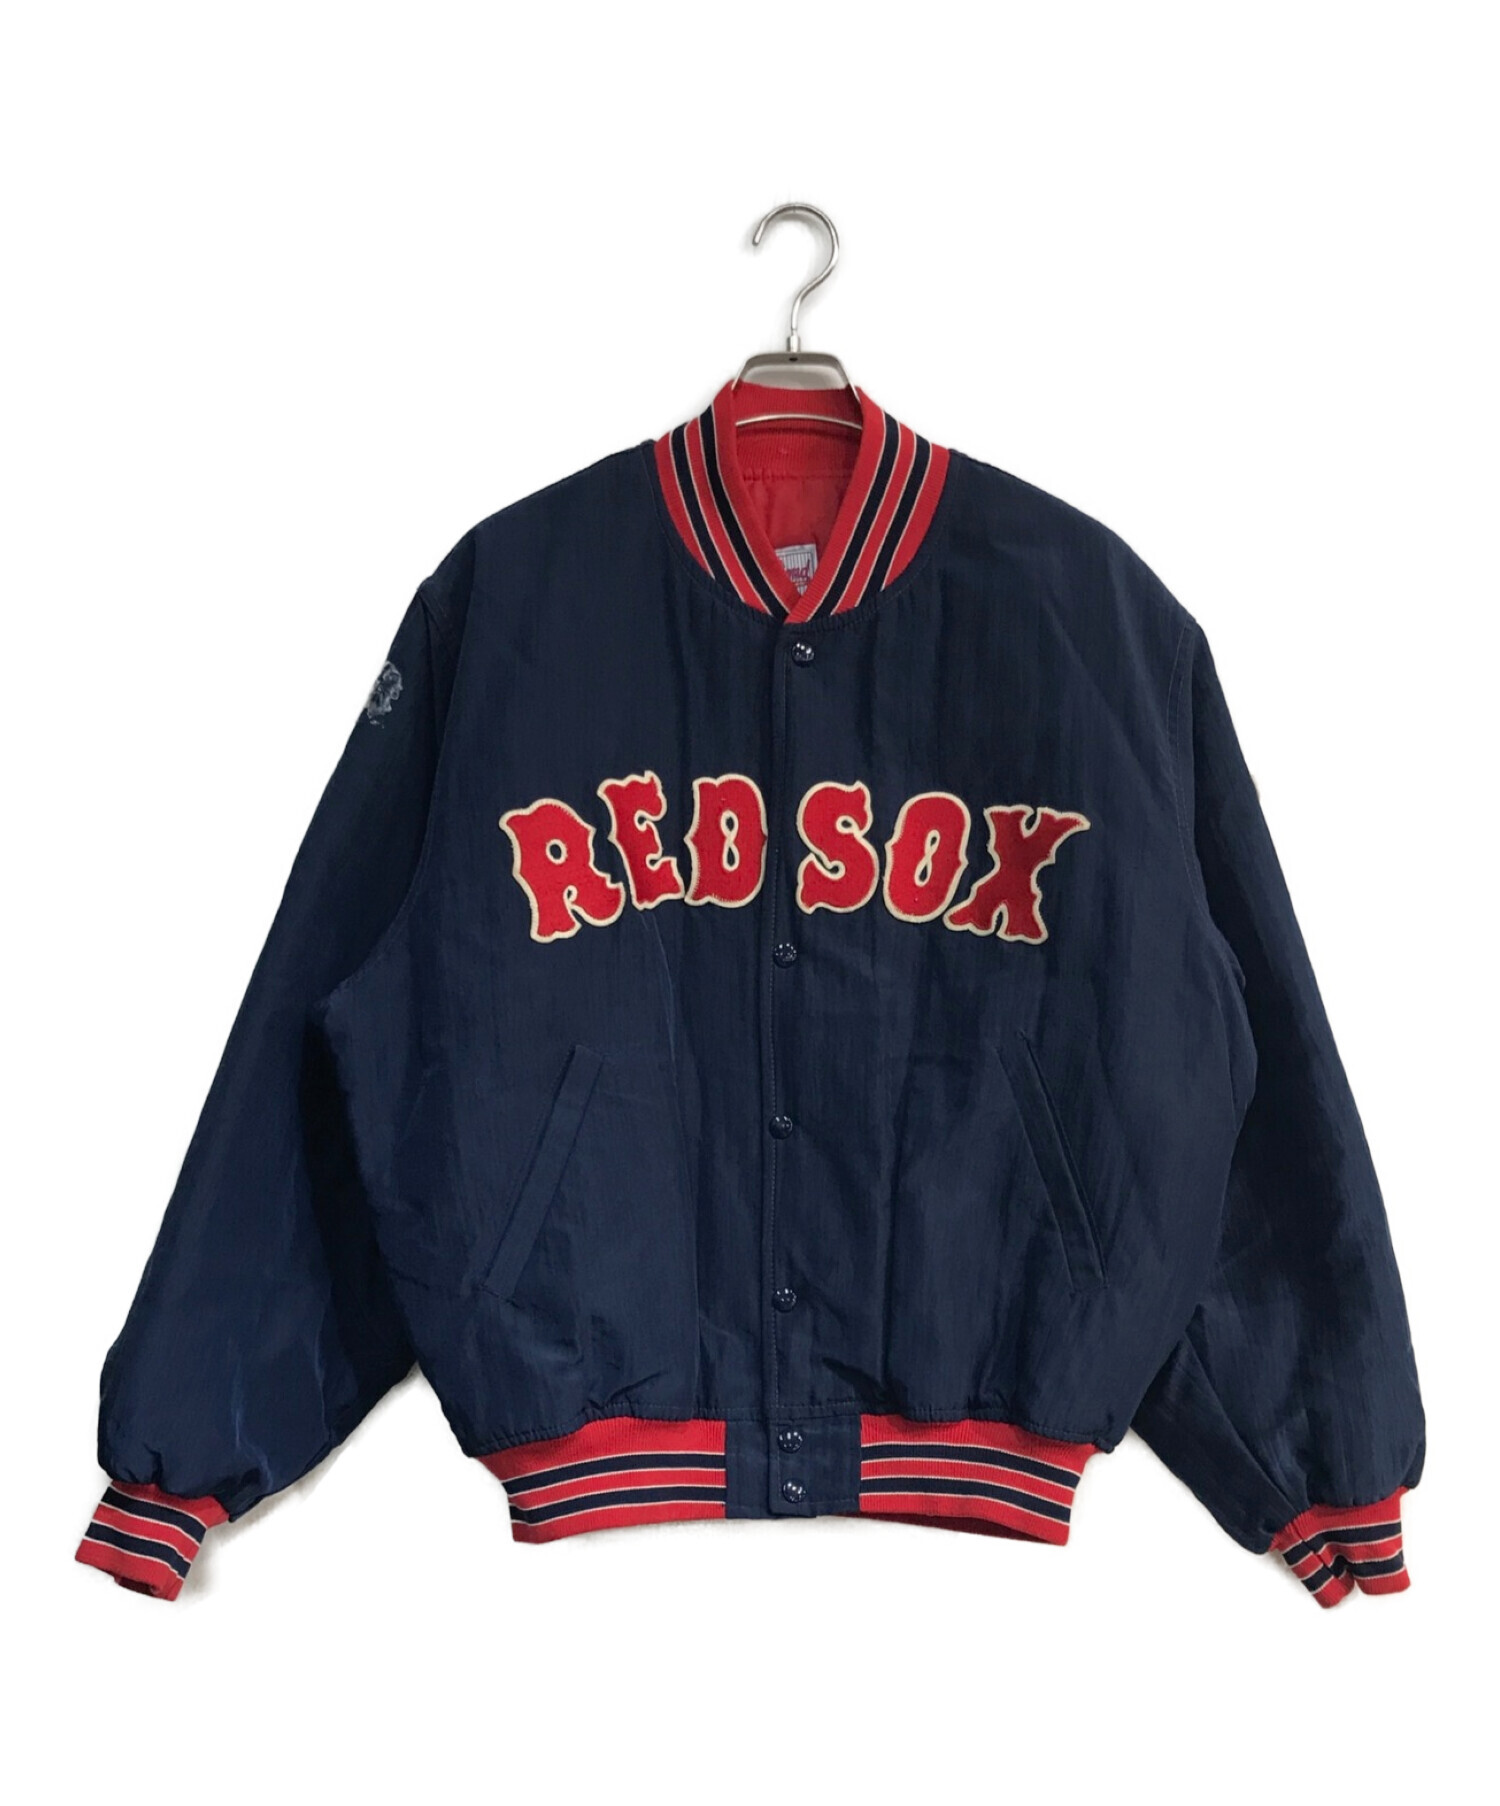 RED SOX スタジャン（古着）